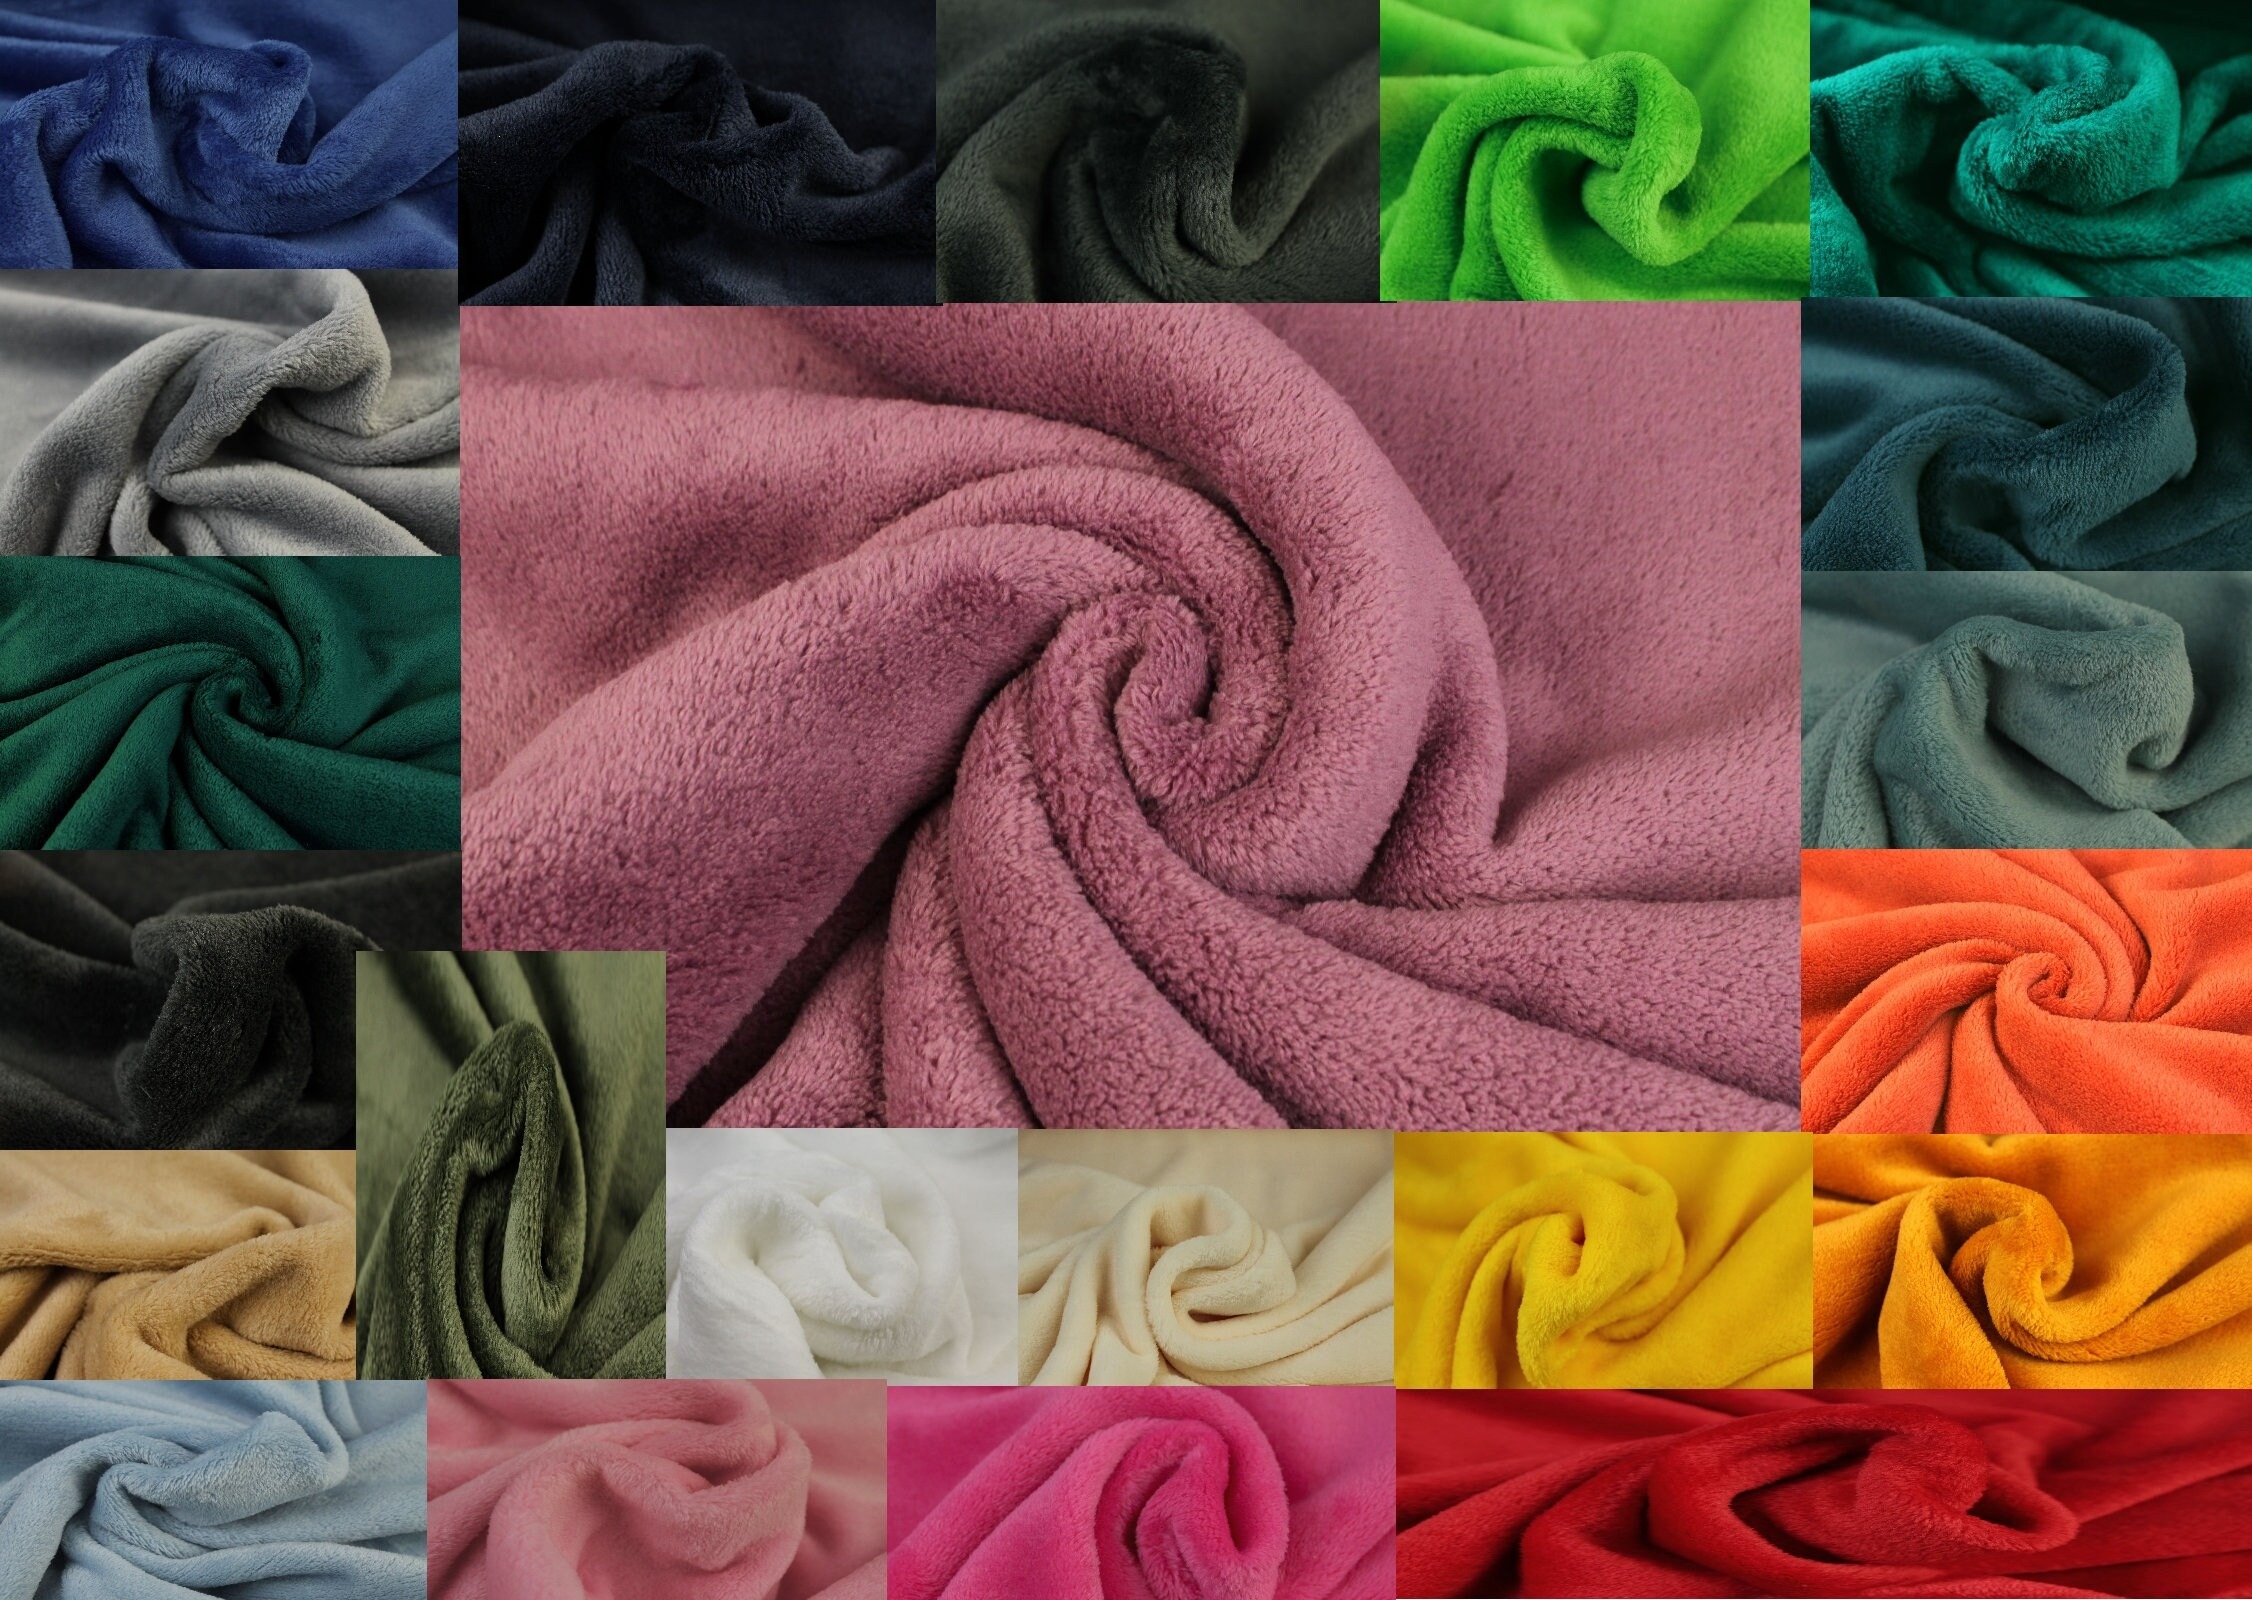 Fleece Fabric Manufacturer Everything You Need to Know Abou KINGCASON (7)